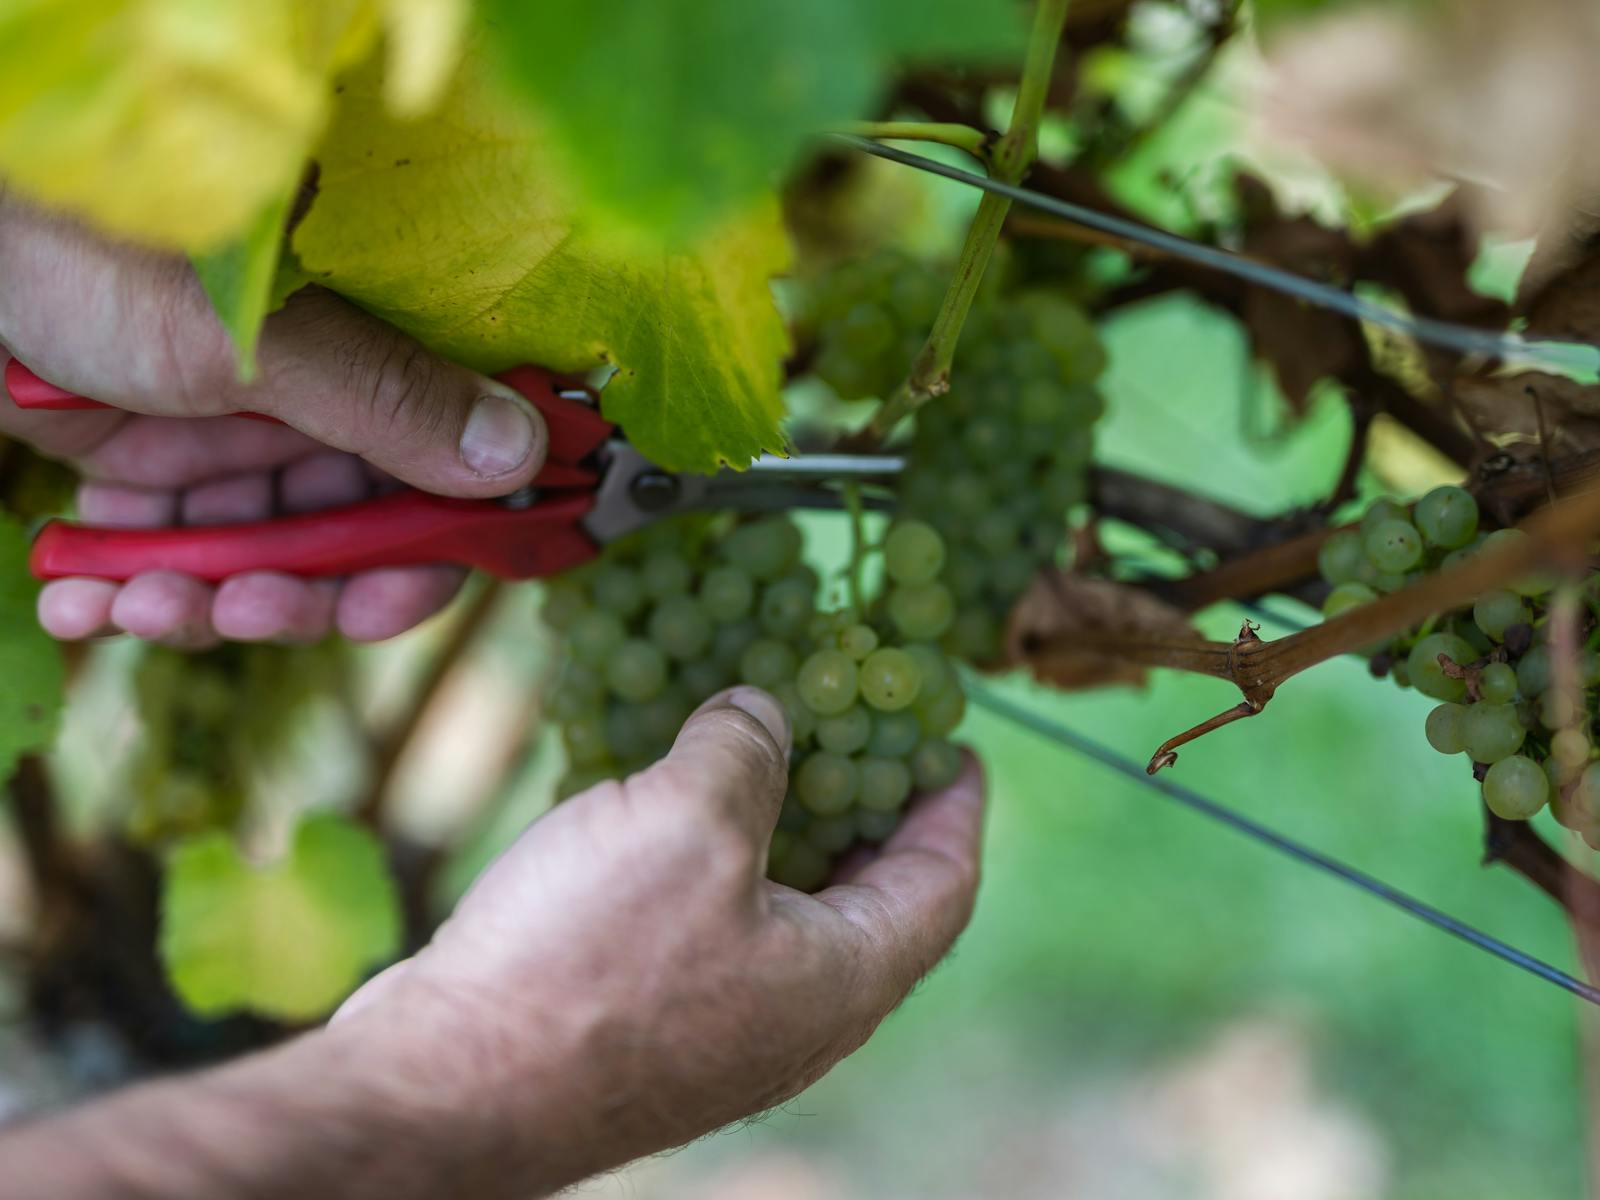 Learn about Bangor Vineyard and our wines while strolling through the vines.